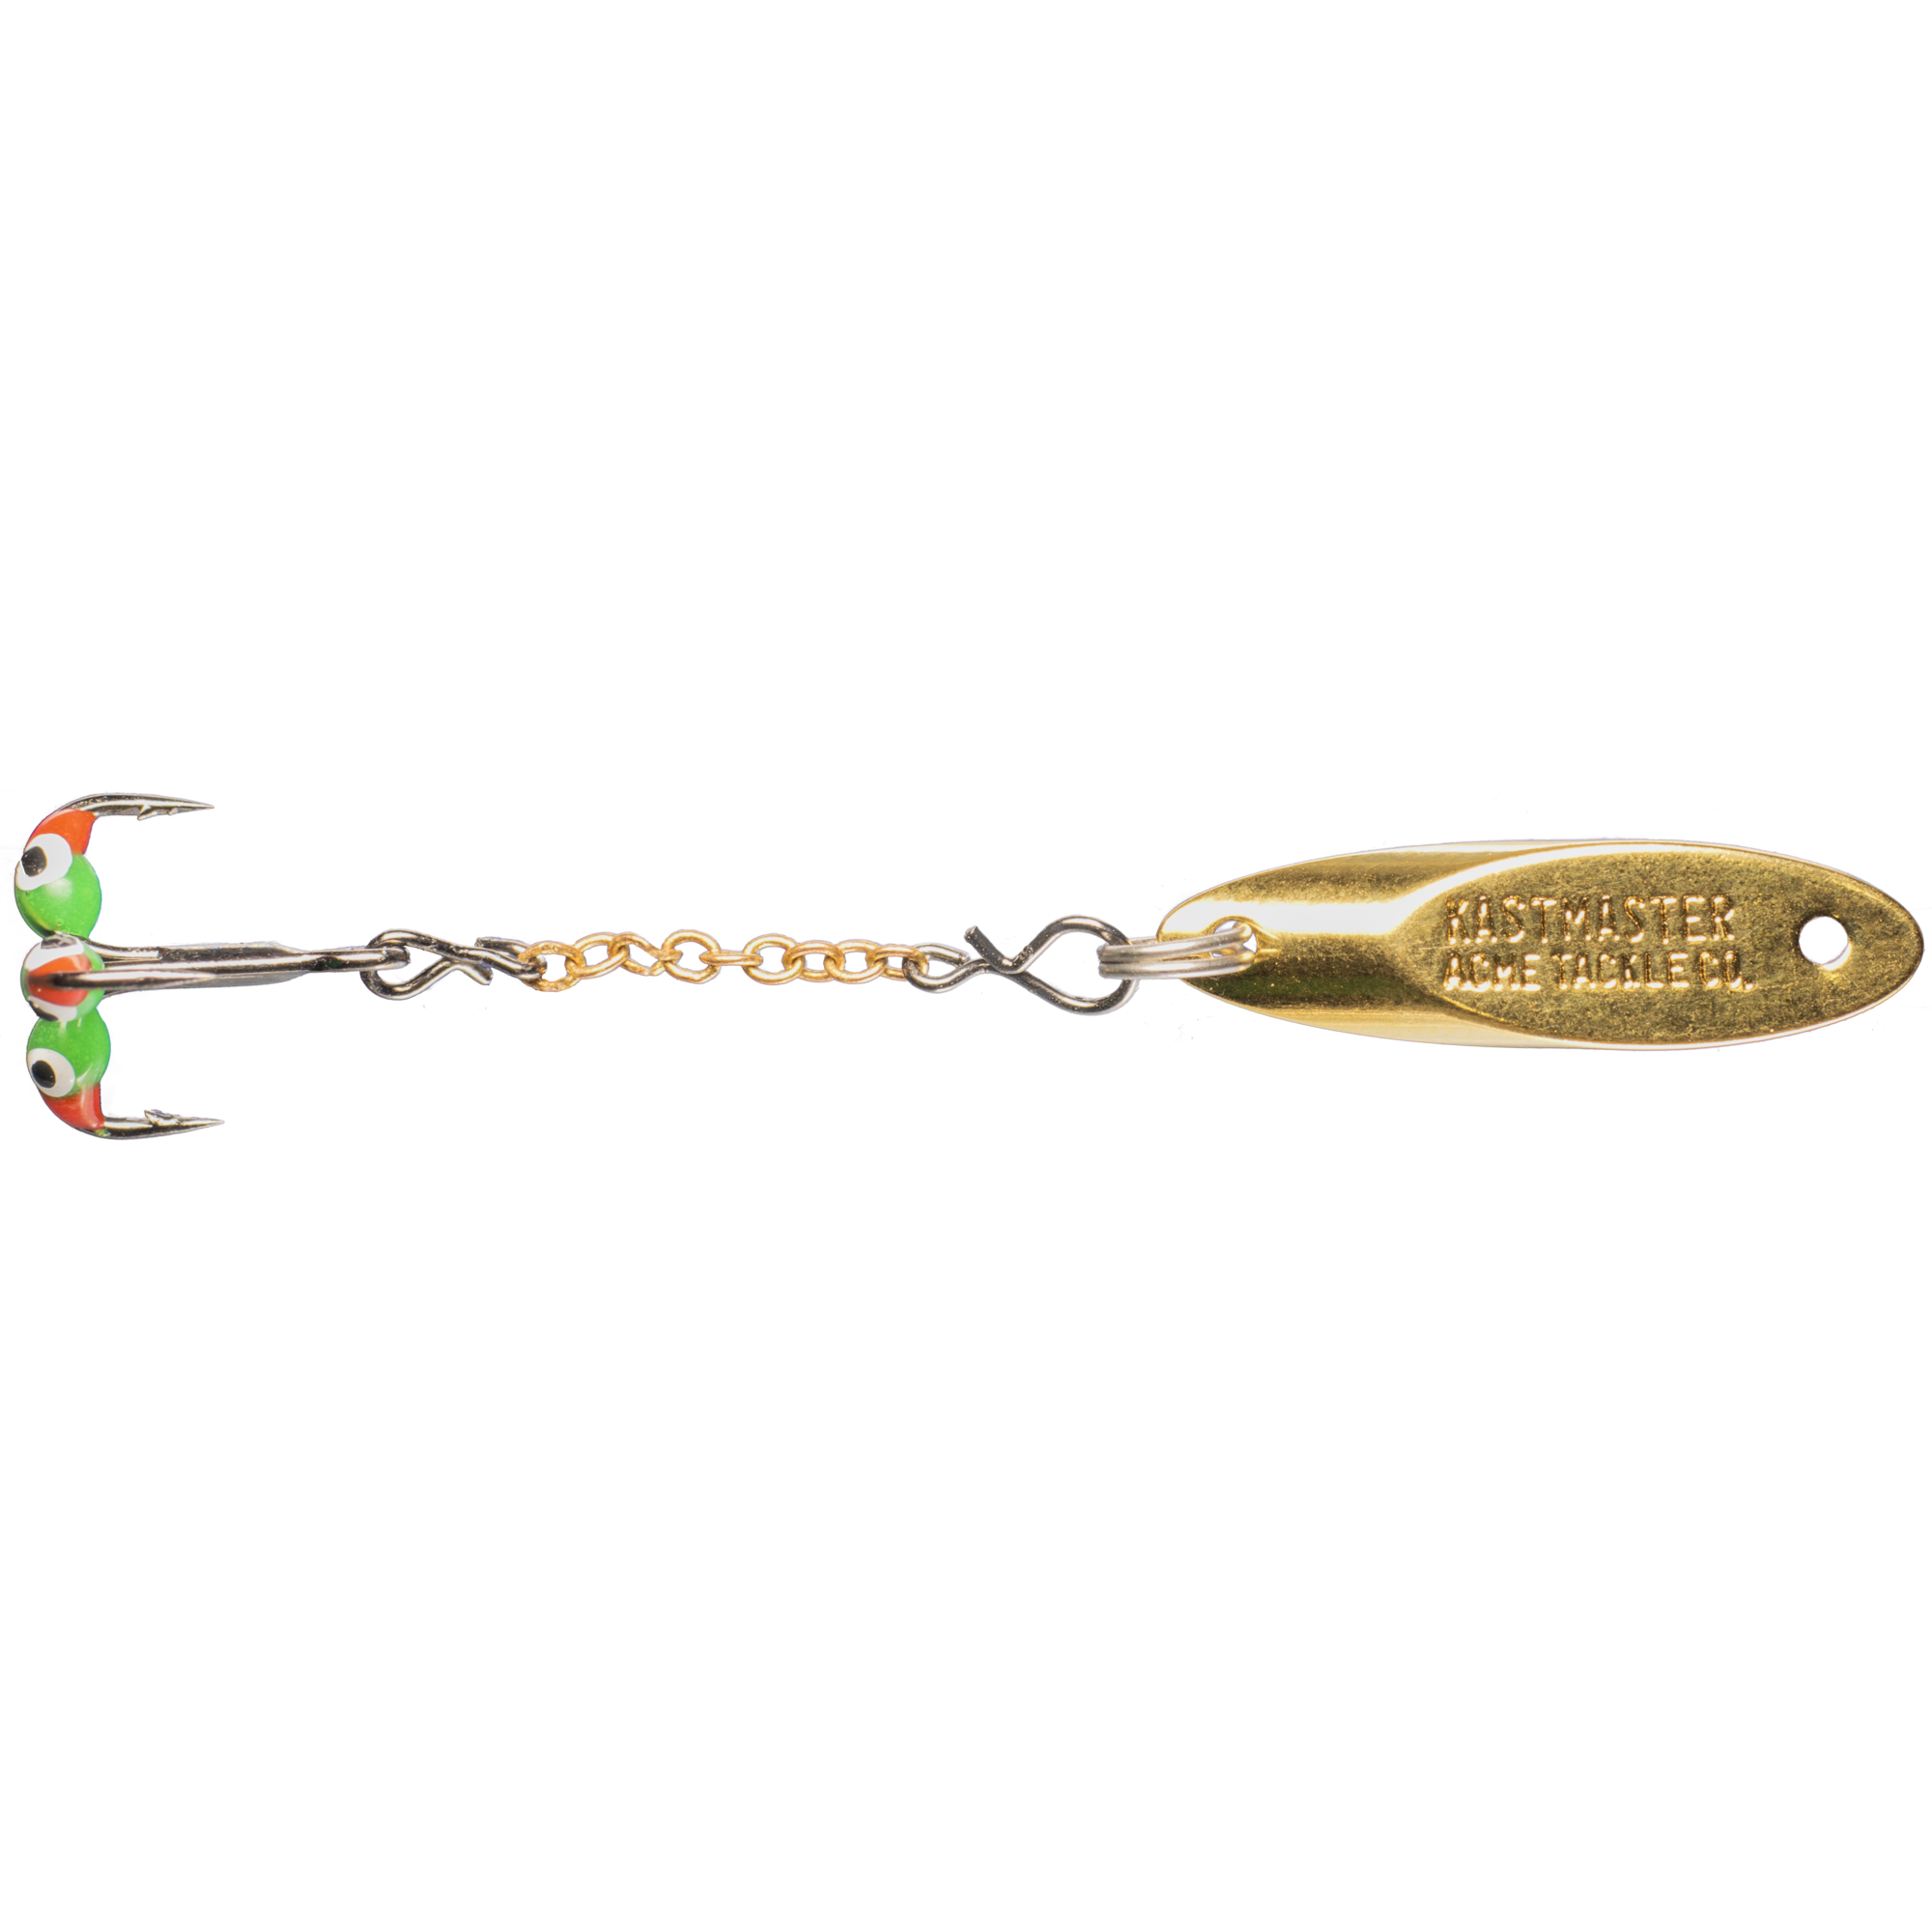 Acme Kastmaster D-Chain Jigging Spoon - Gold - 1/8 oz.